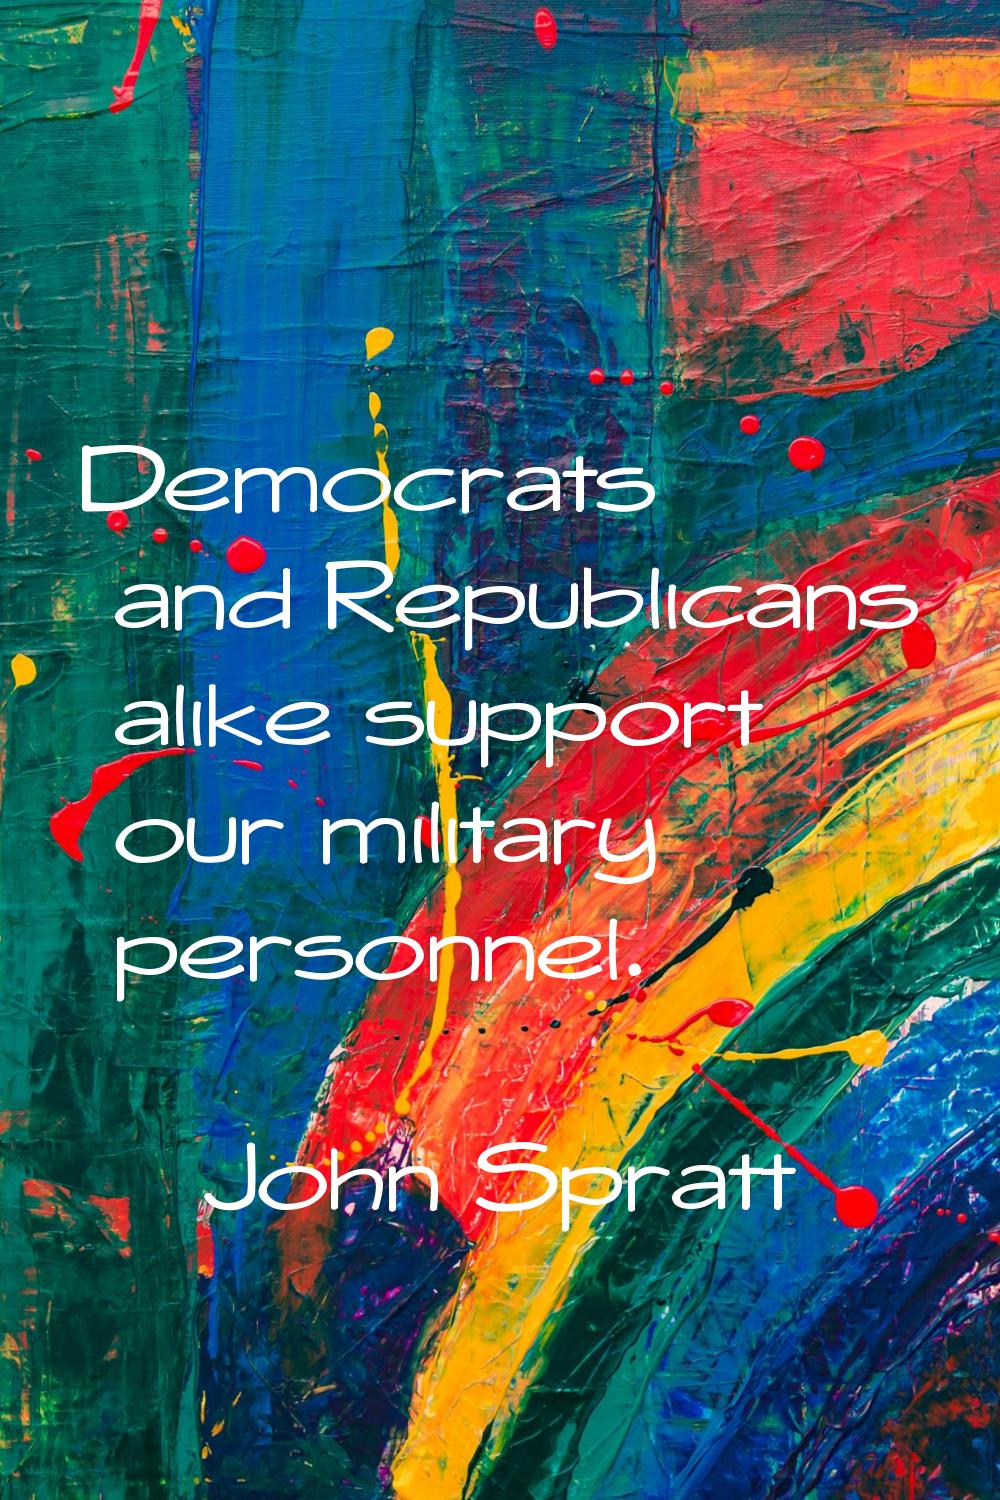 Democrats and Republicans alike support our military personnel.